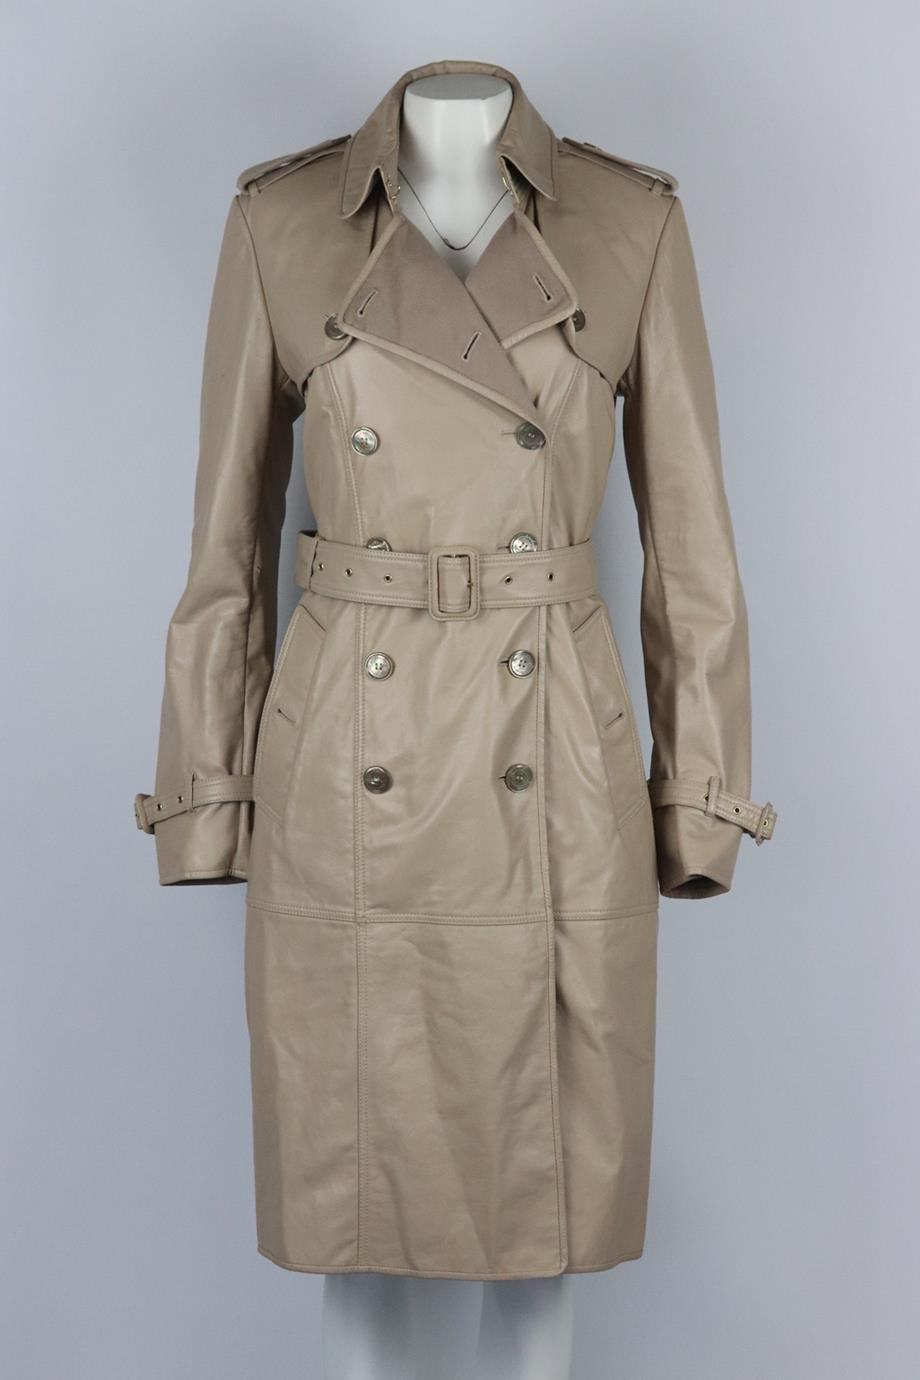 BURBERRY PRORSUM BELTED DOUBLE BREASTED LEATHER TRENCH COAT IT 44 UK 12